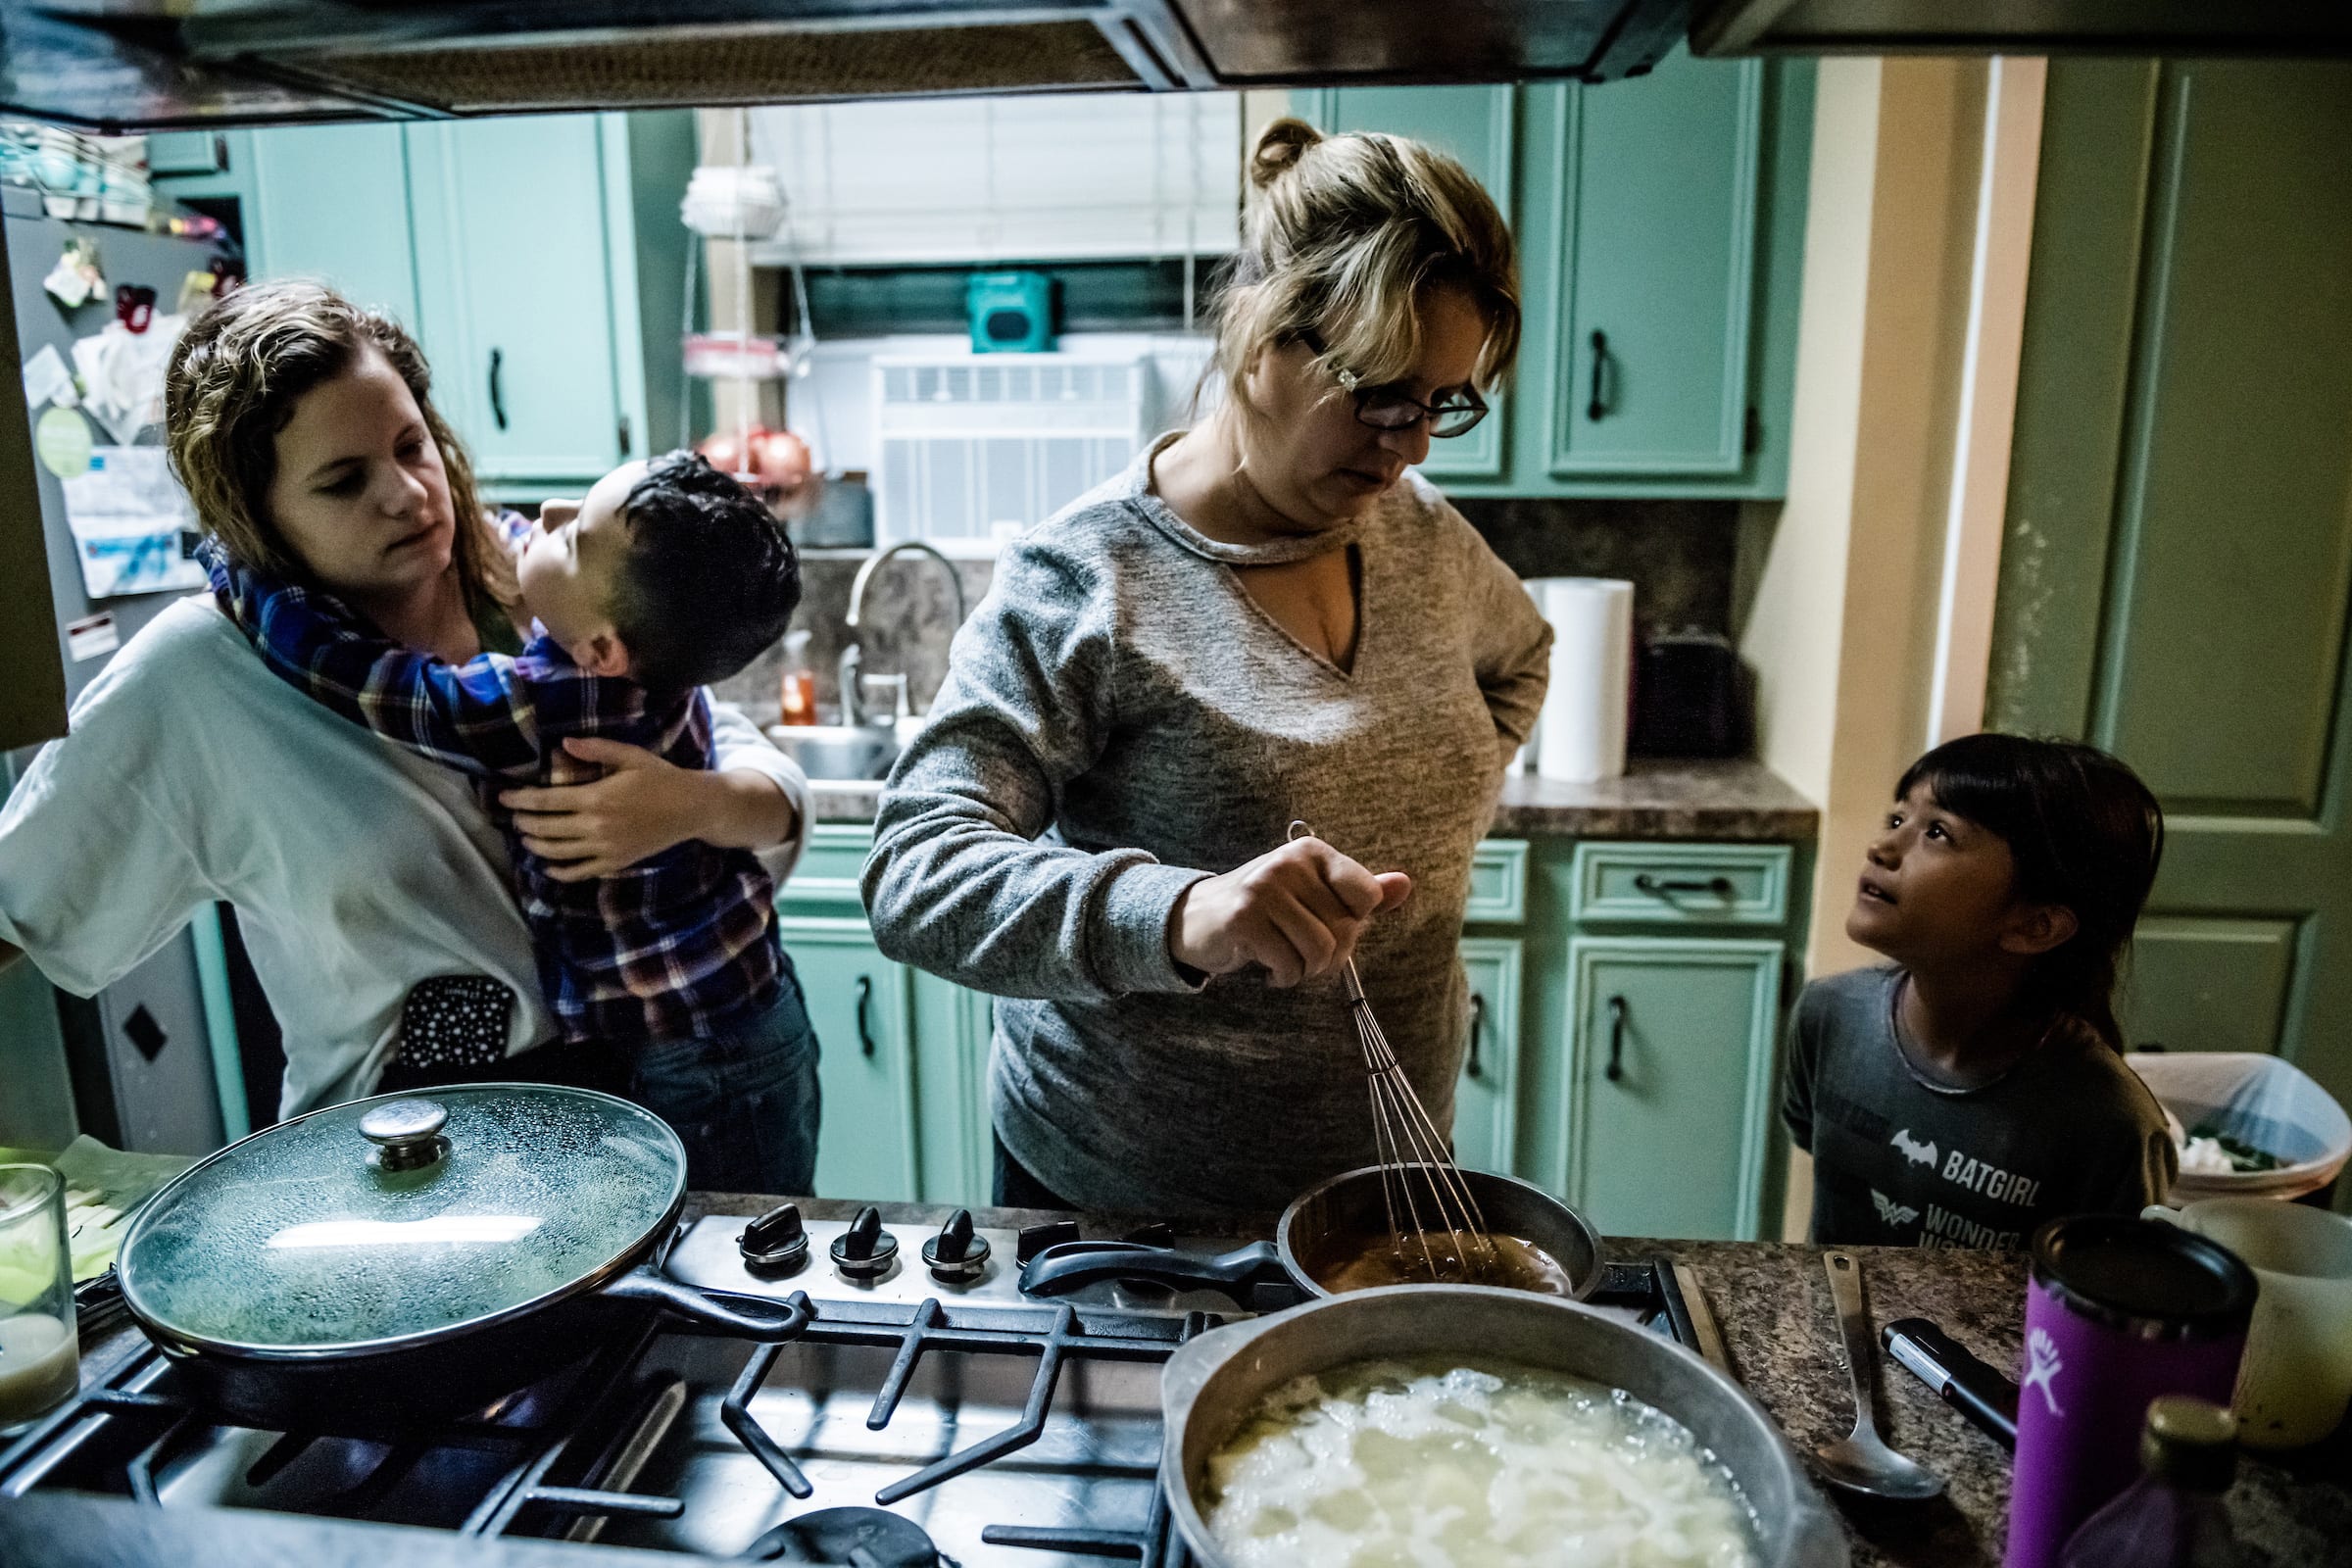 Jessica Higginbotham, second from right, is thankful she was able to cook dinner for her five children on Nov. 17, 2020. She survived heart and kidney transplants in 2019; she and three other members of her family had COVID-19 this year. The health issues, paired with her husband Jeremiah’s losing hours at work, cost the Baytown, Texas, family most of their life savings.